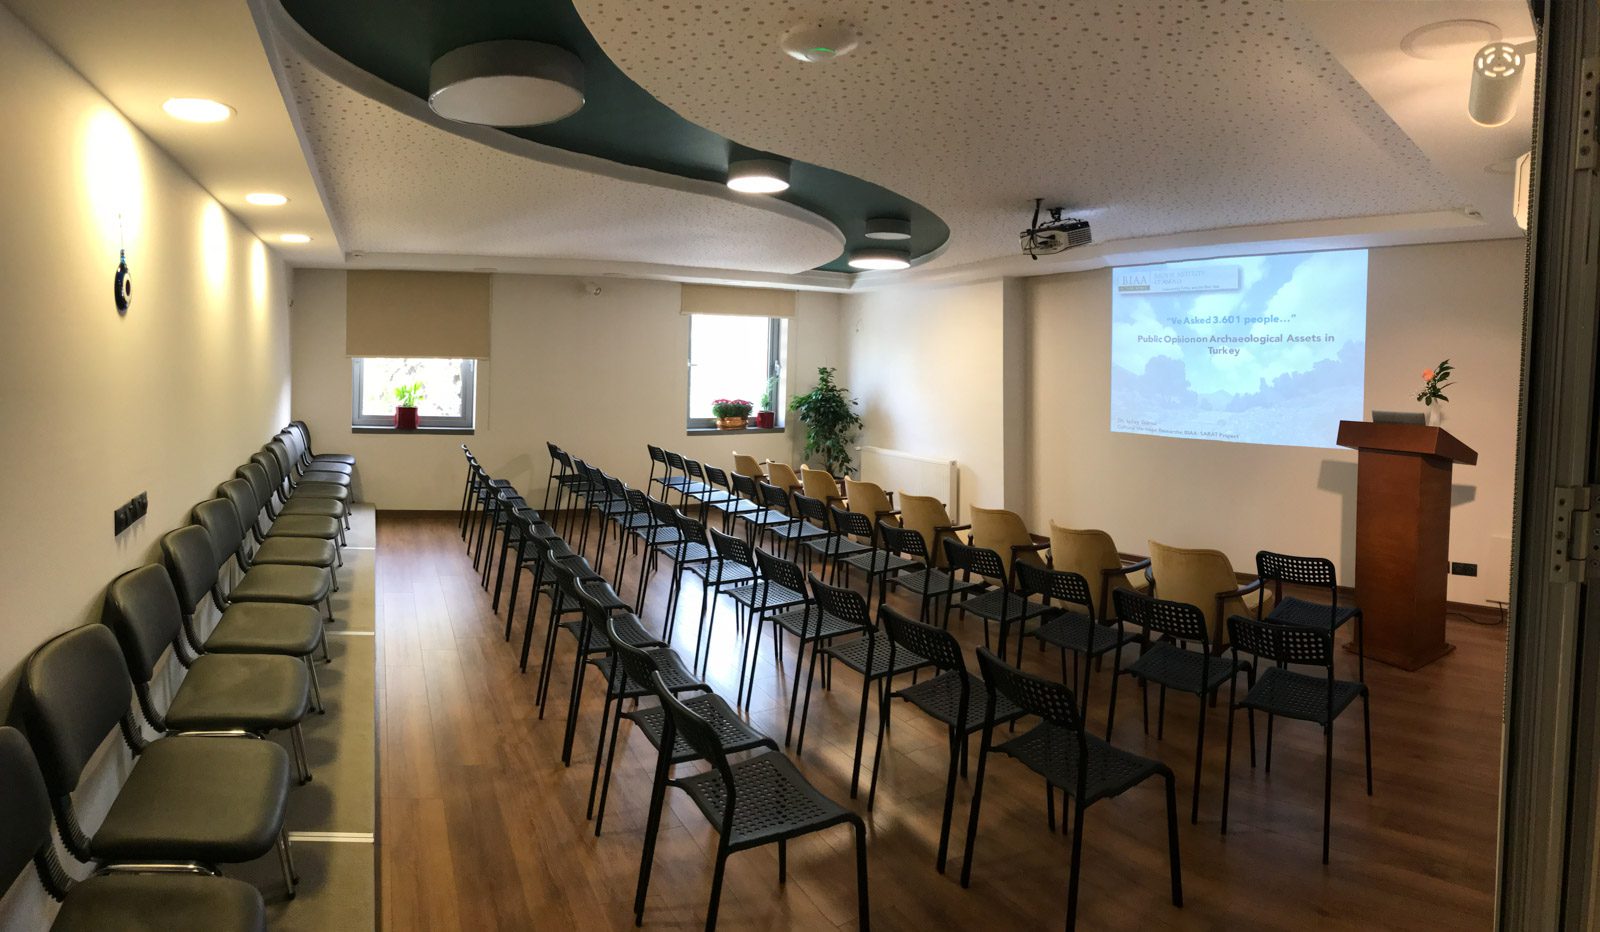 2018 BIAA conference room first set up - 2